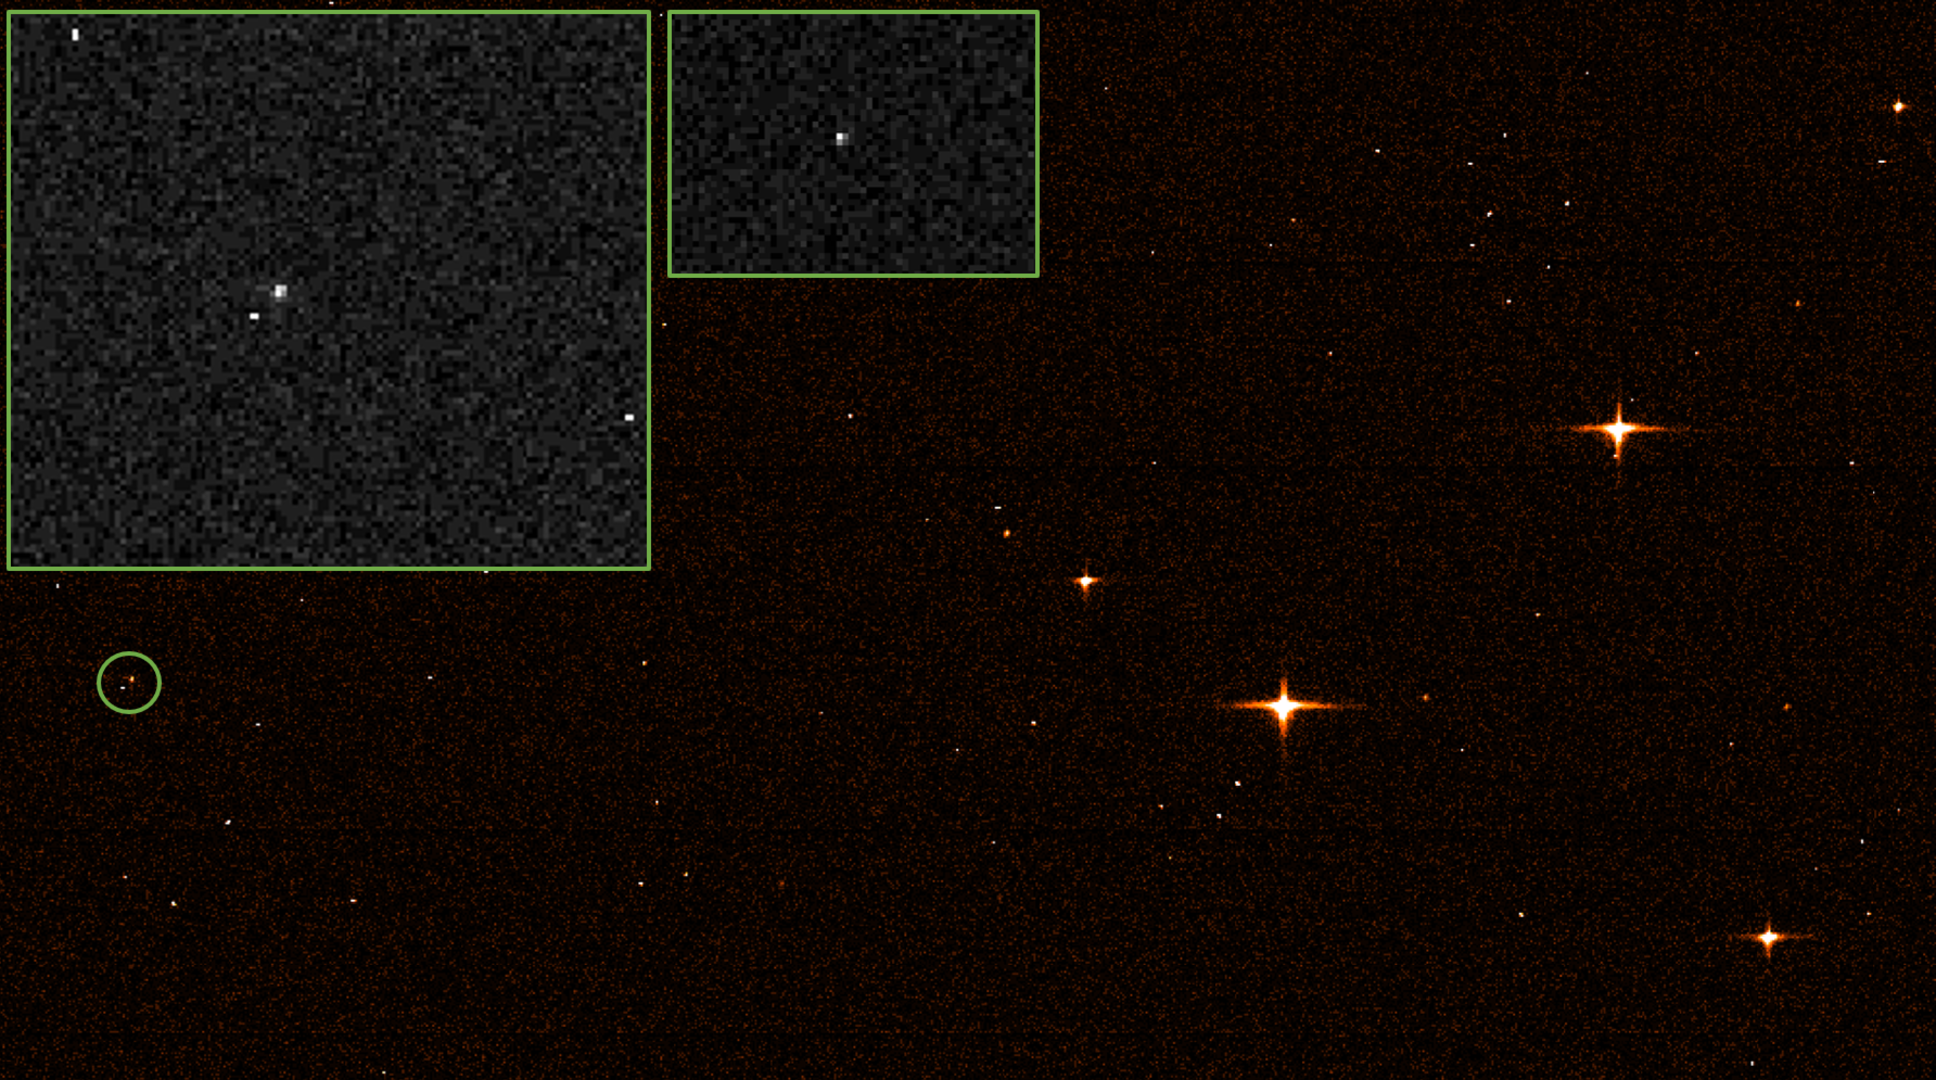 Daily News | Online News The European Space Agency's Gaia spacecraft spotted the James Webb Space Telescope, circled in green, with two inset views.